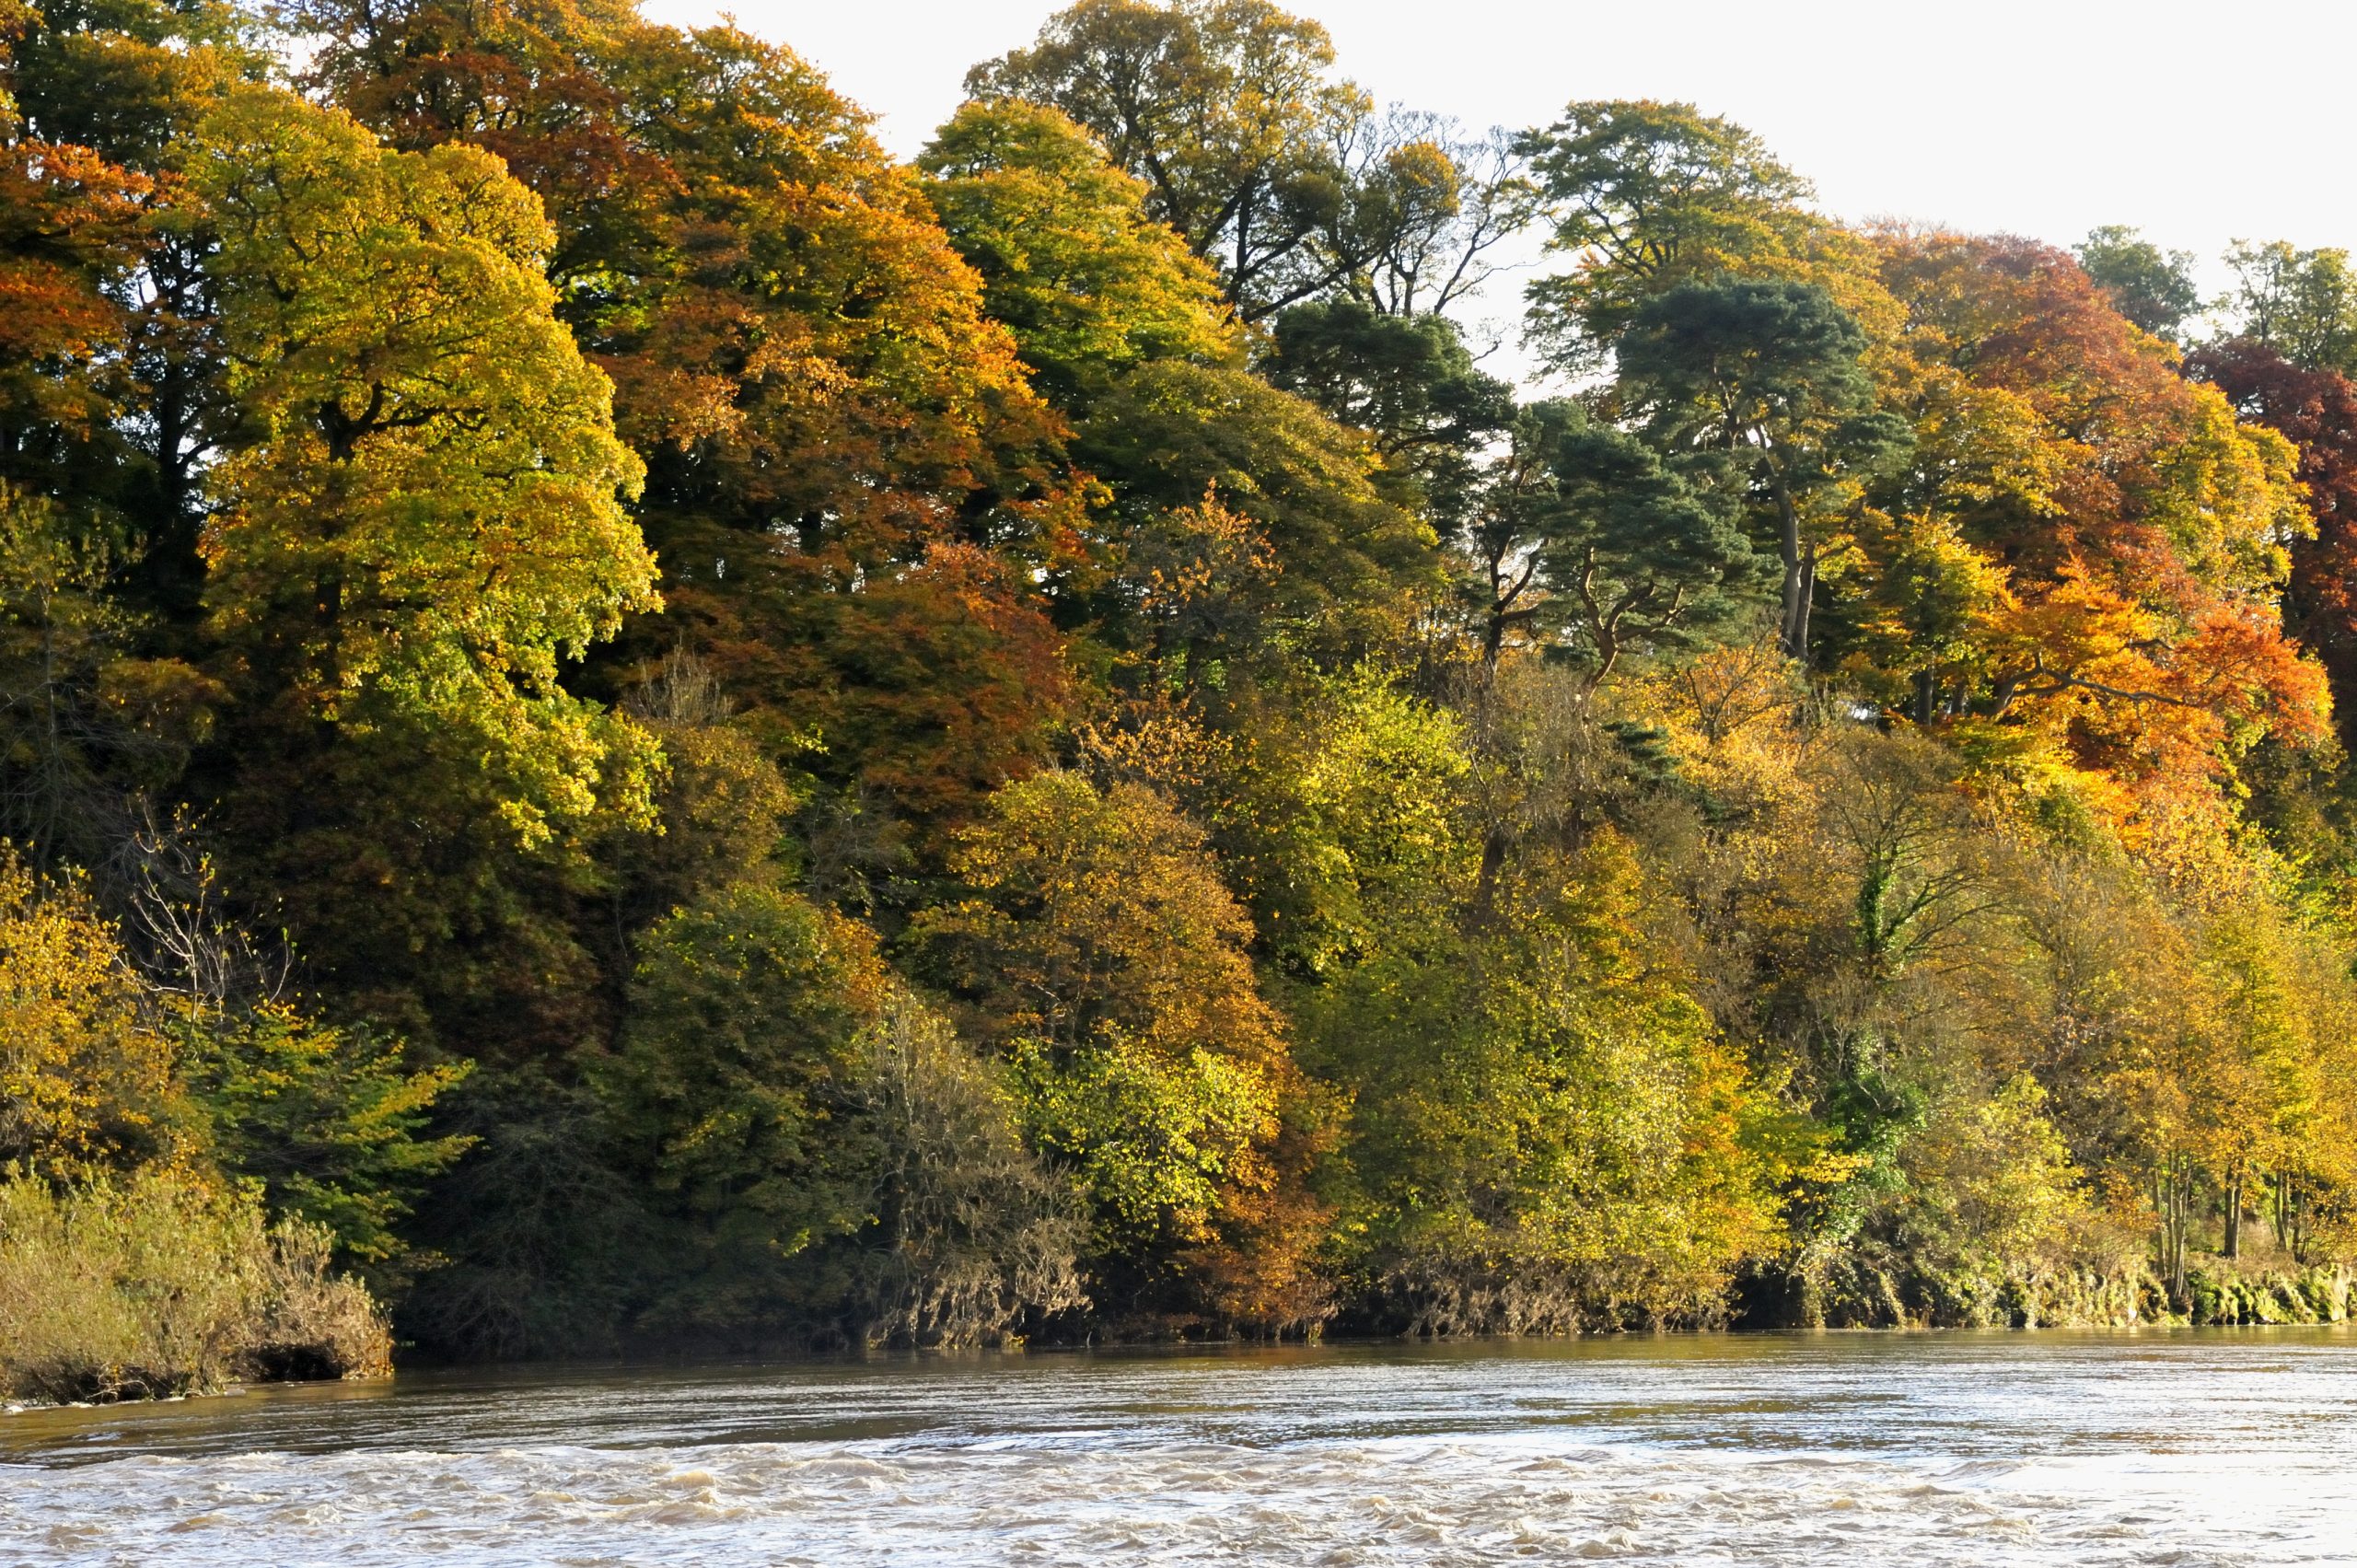 Autumn colours on the banks of the River Tweed